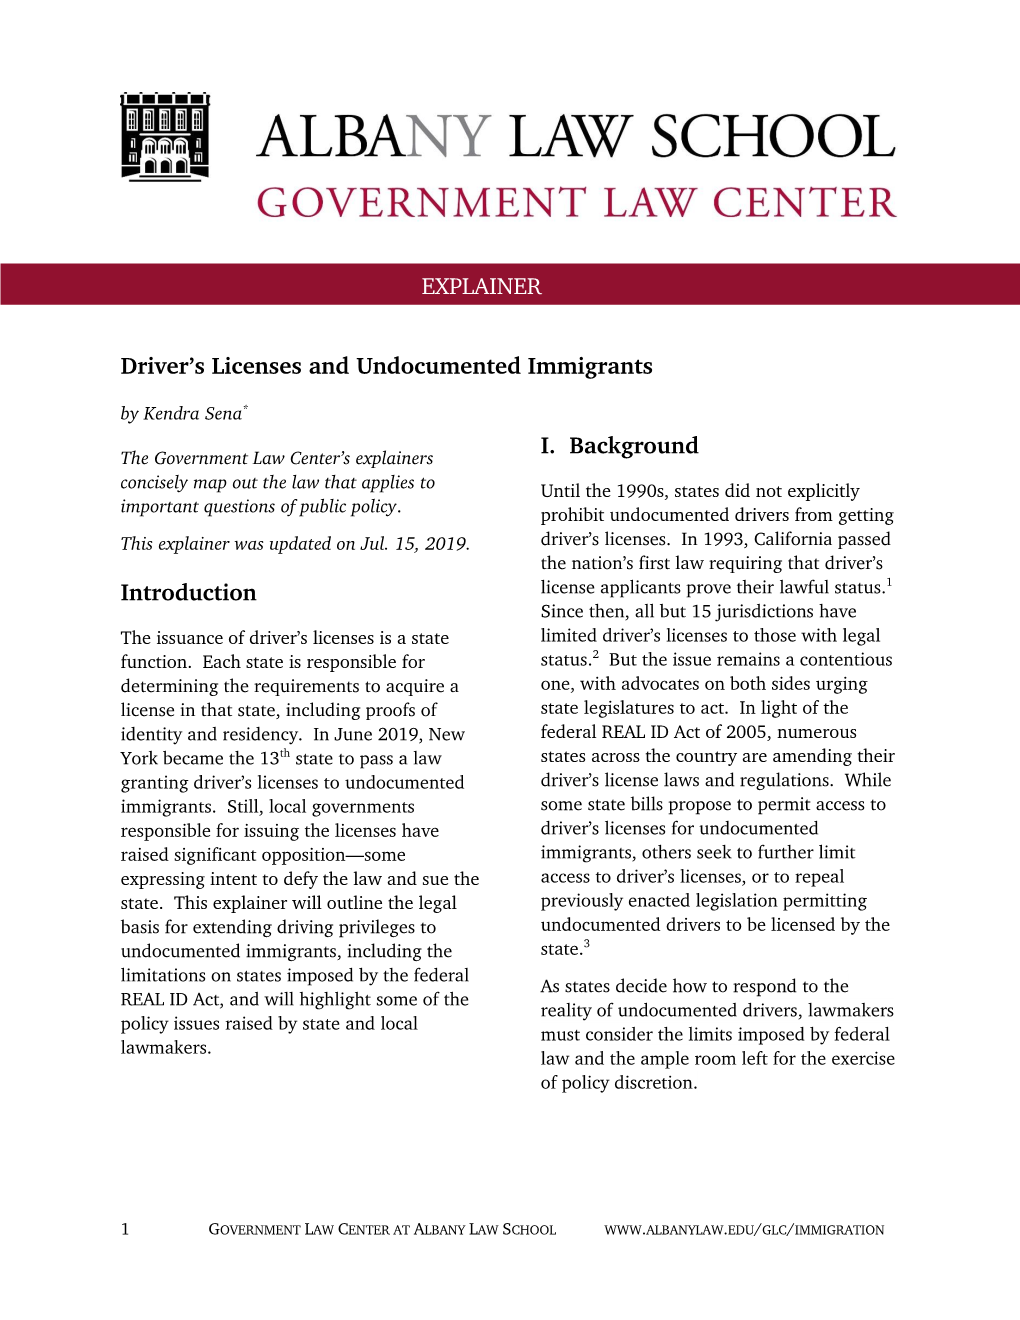 Driver's Licenses and Undocumented Immigrants Introduction I